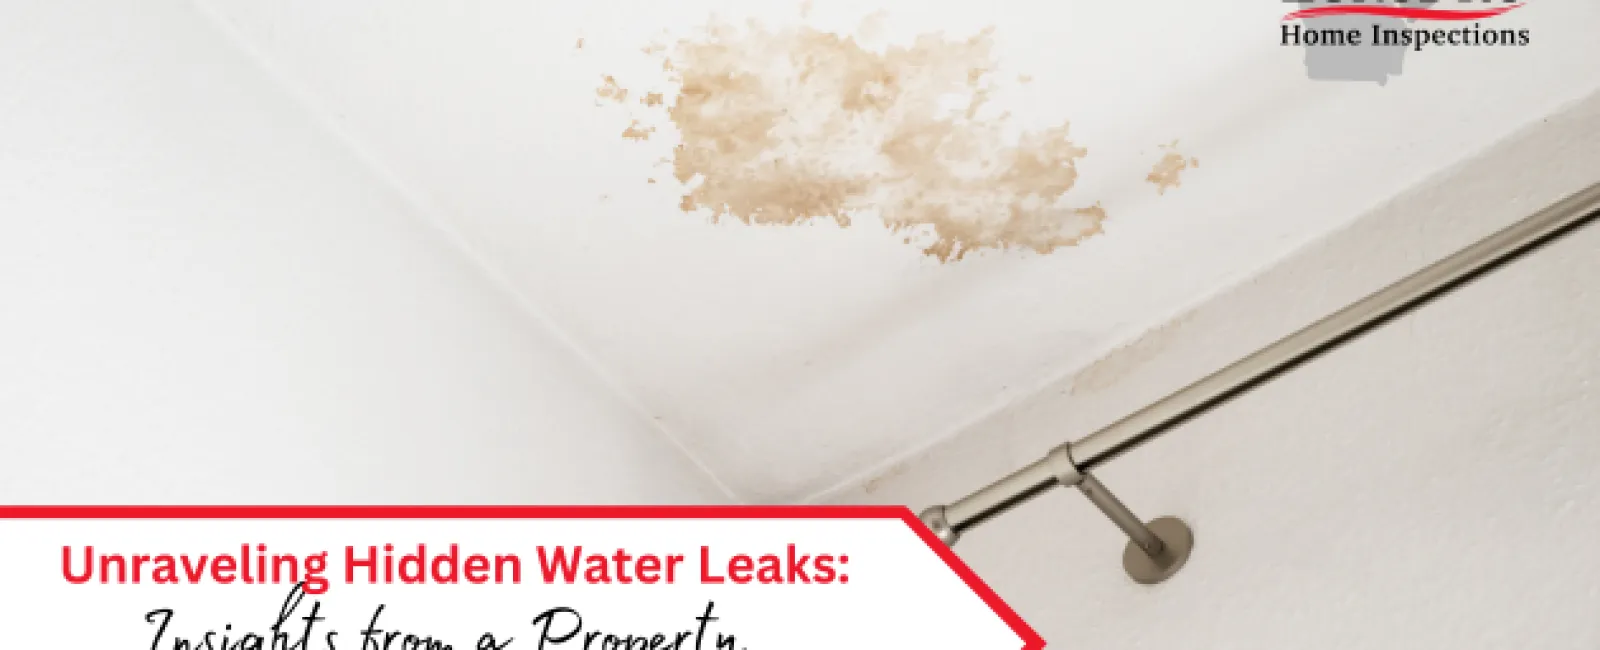 Unraveling Hidden Water Leaks: Insights from a Property Maintenance Inspection